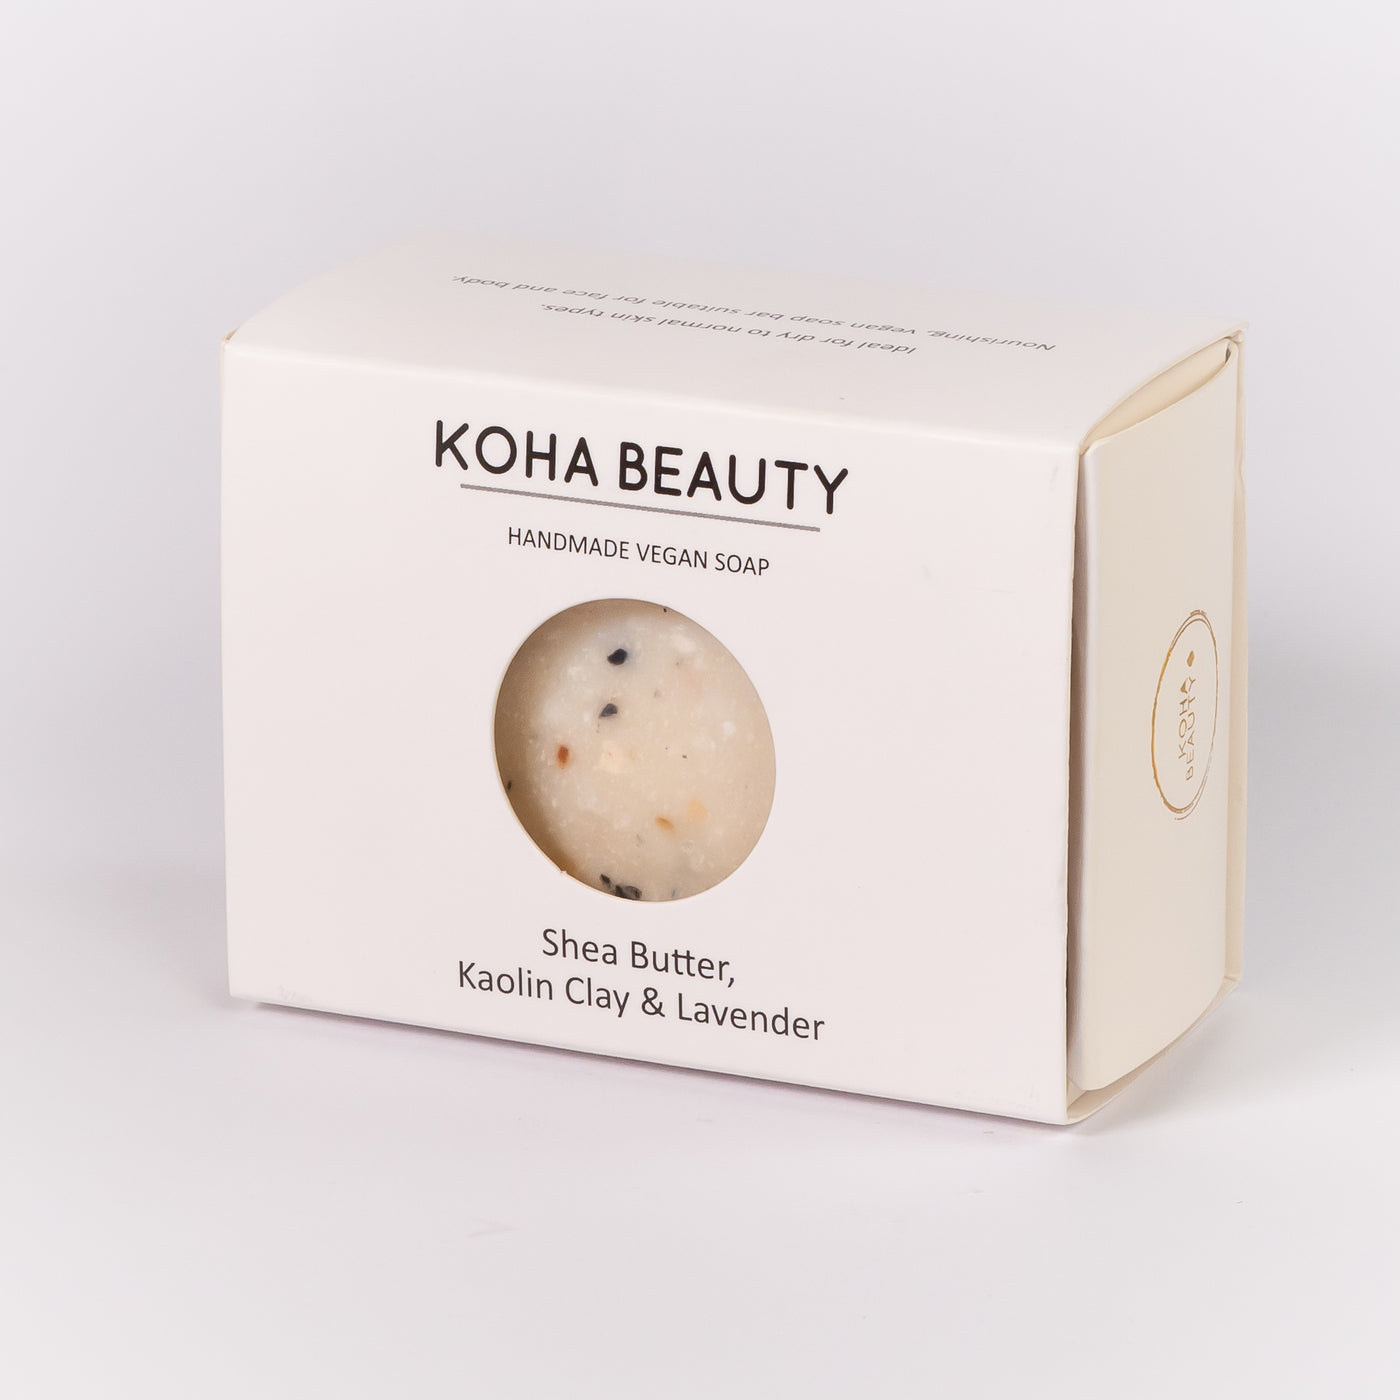 Buy Online Premium Quality Natural and Organic Stardust - Shea Butter, Kaolin Clay & Lavender | Buy Cruelty Free Cosmetics & Vegan Beauty Products Online - KOHA Beauty